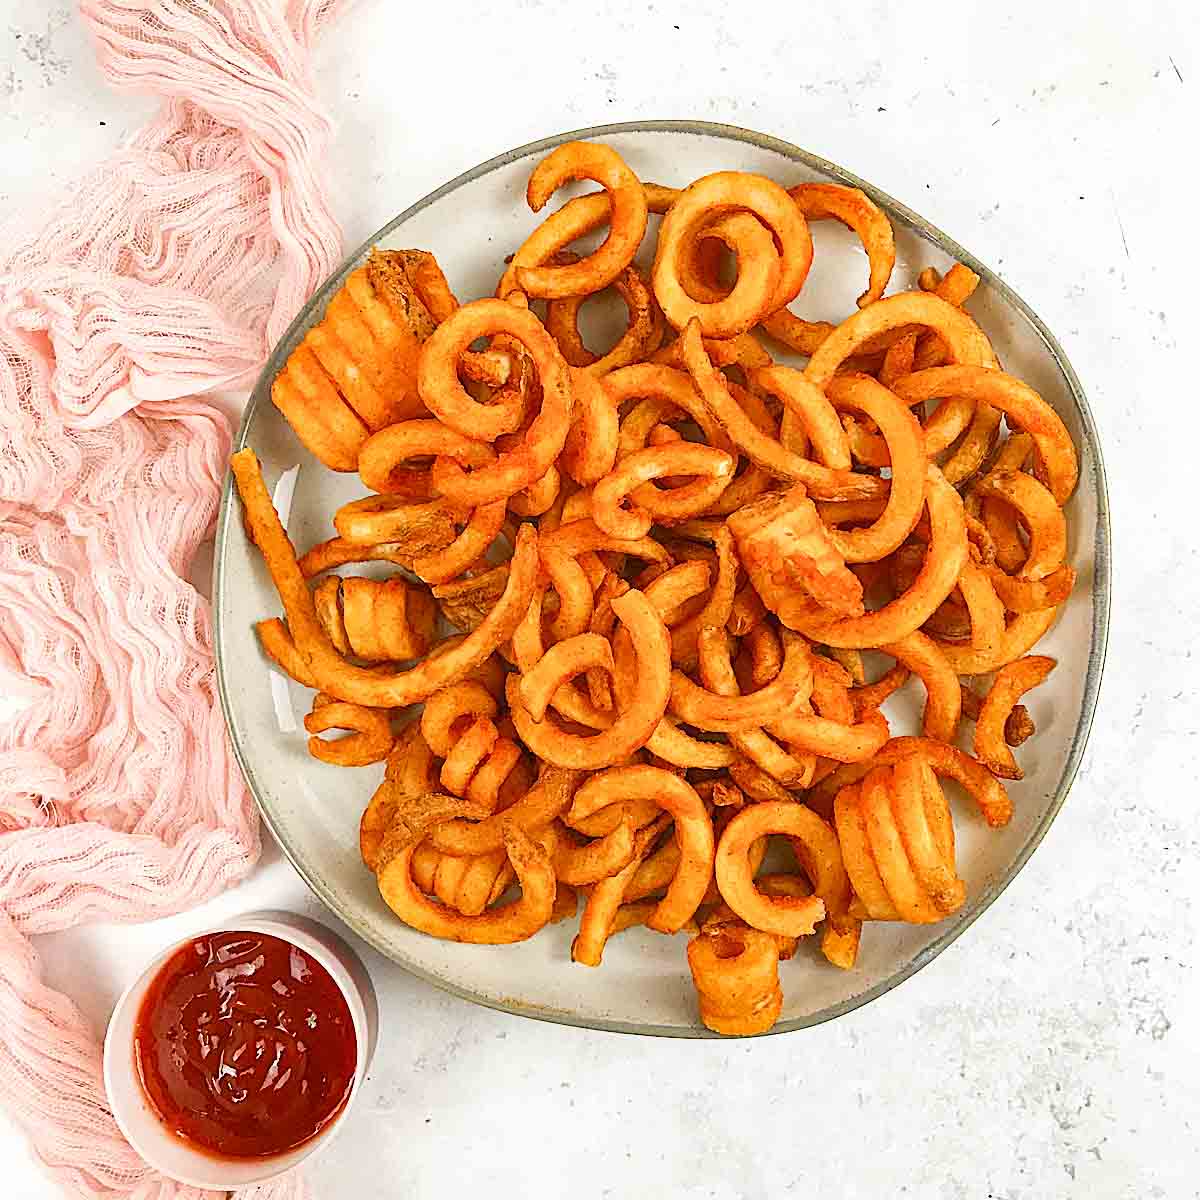 Frozen curly fries in air fryer (Arby’s curly fries)